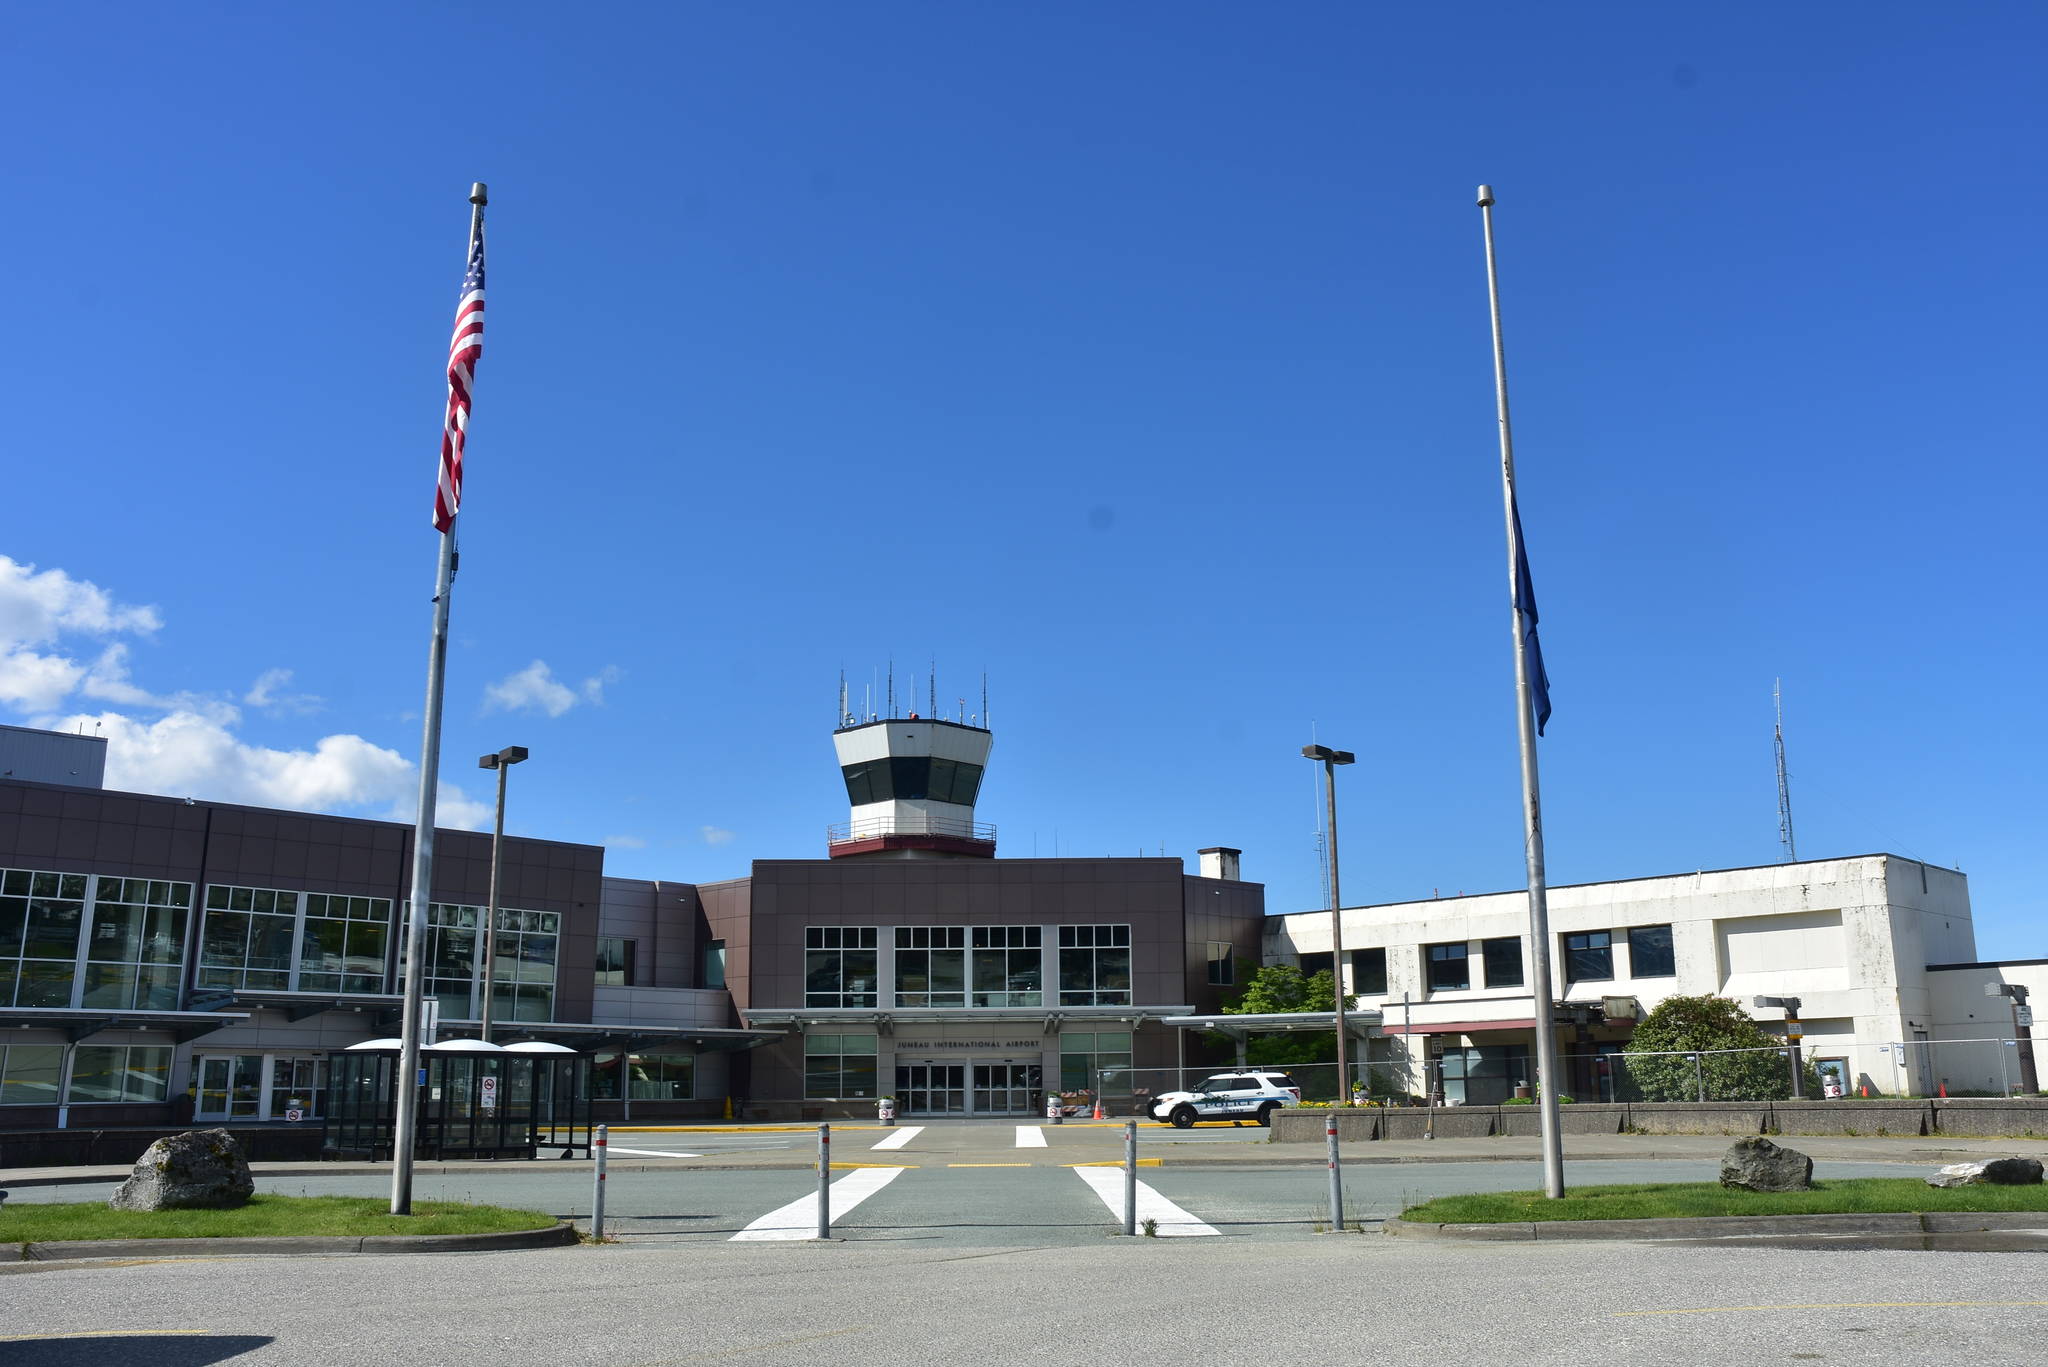 A traveler not from Alaska tested for COVID-19 at Juneau International Airport has tested positive. (Peter Segall / Juneau Empire File)